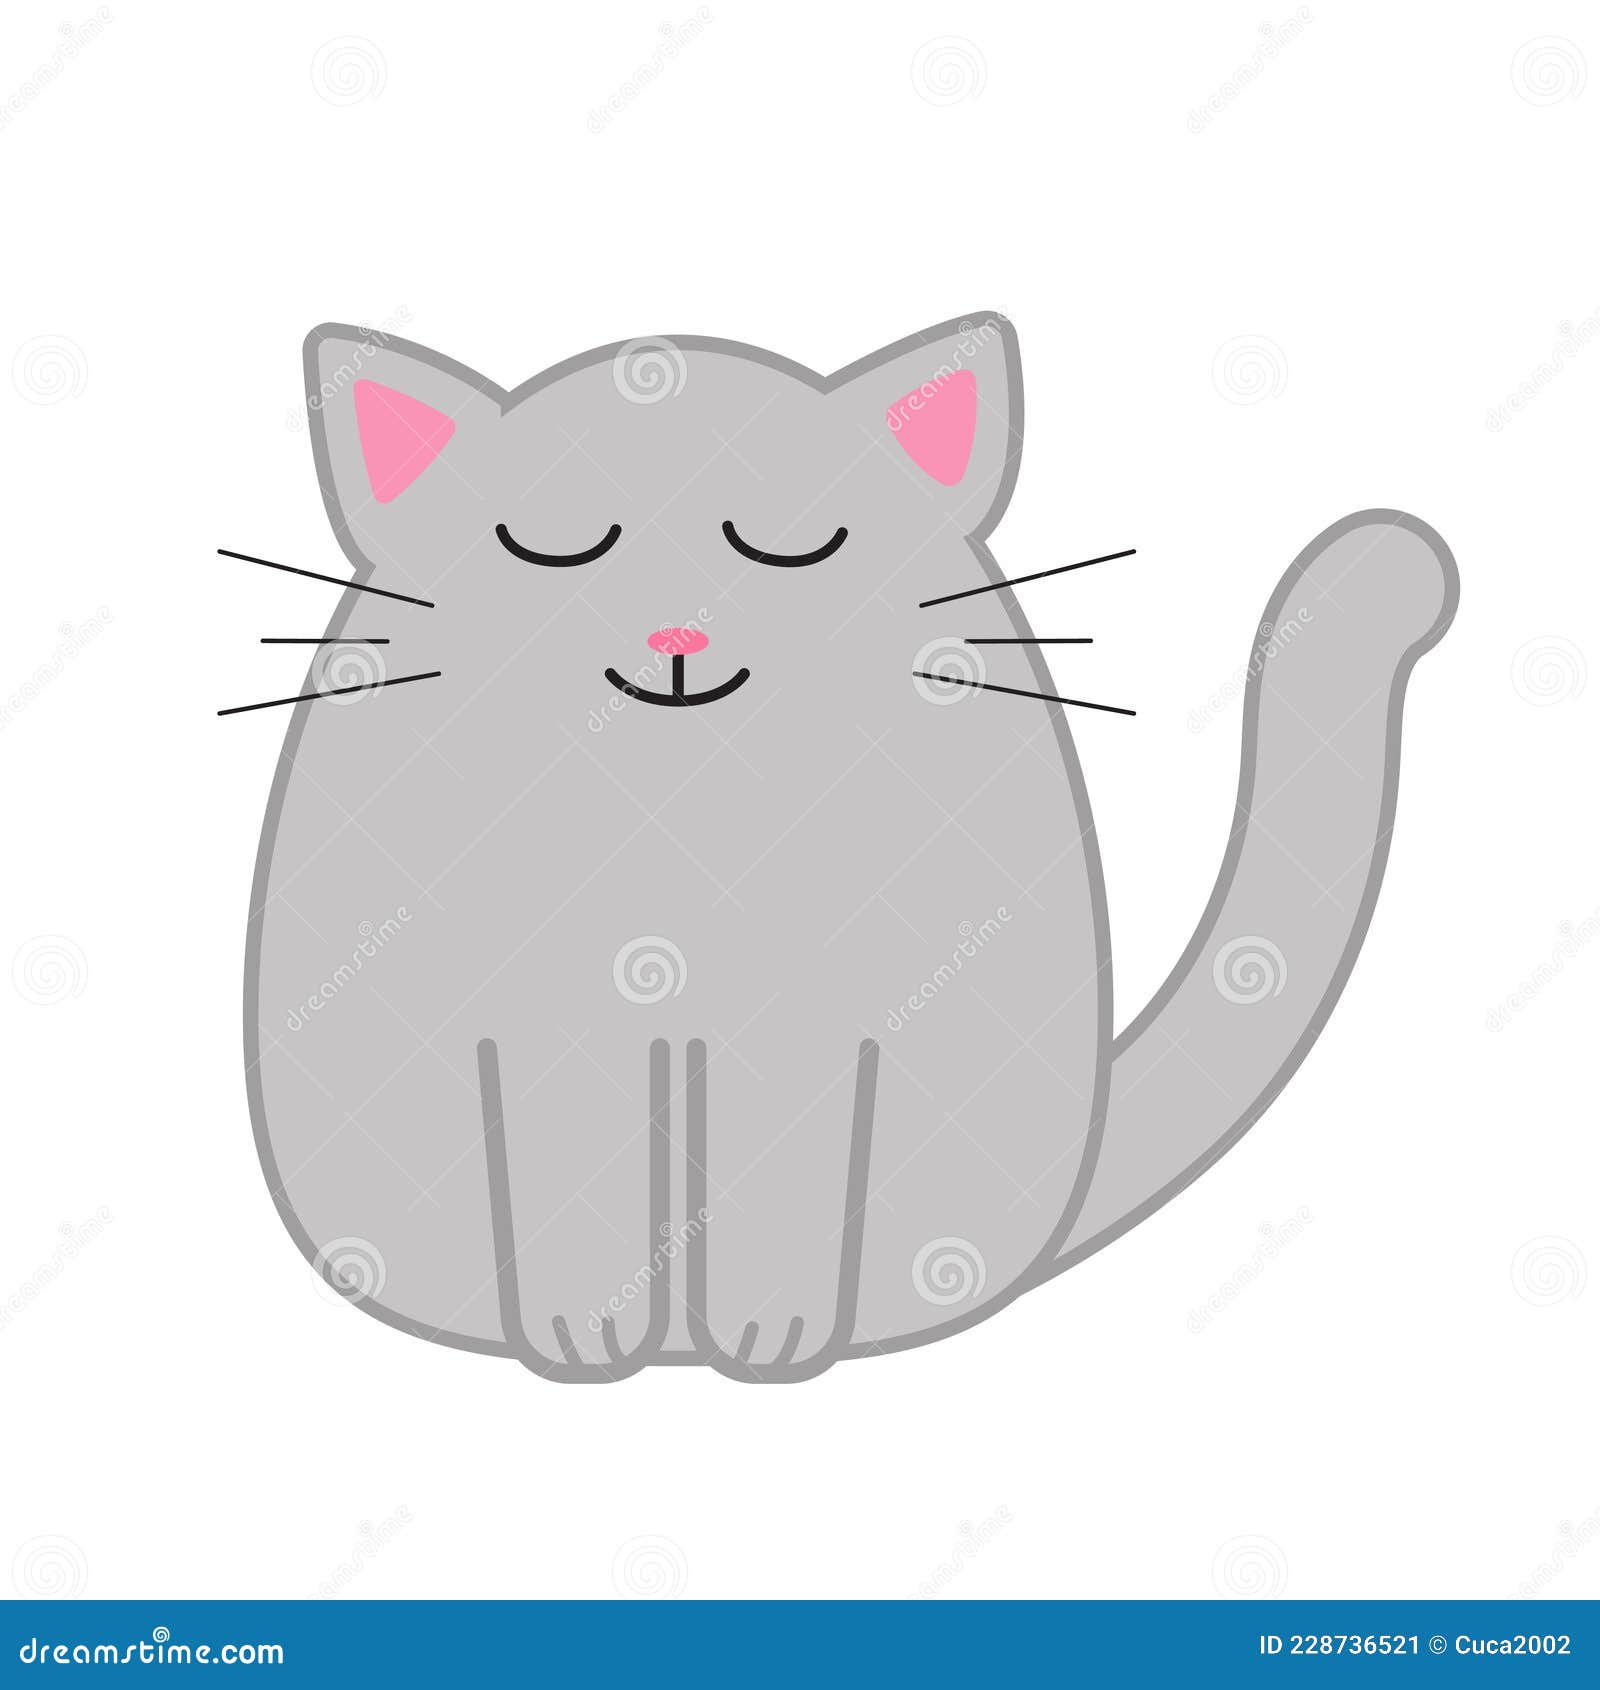 Funny Cartoon Cat, Cute Vector Illustration in Flat Style. Gray Cat with  Closed Eyes. Smiling Fat Kitten Stock Vector - Illustration of outline,  smile: 228736521